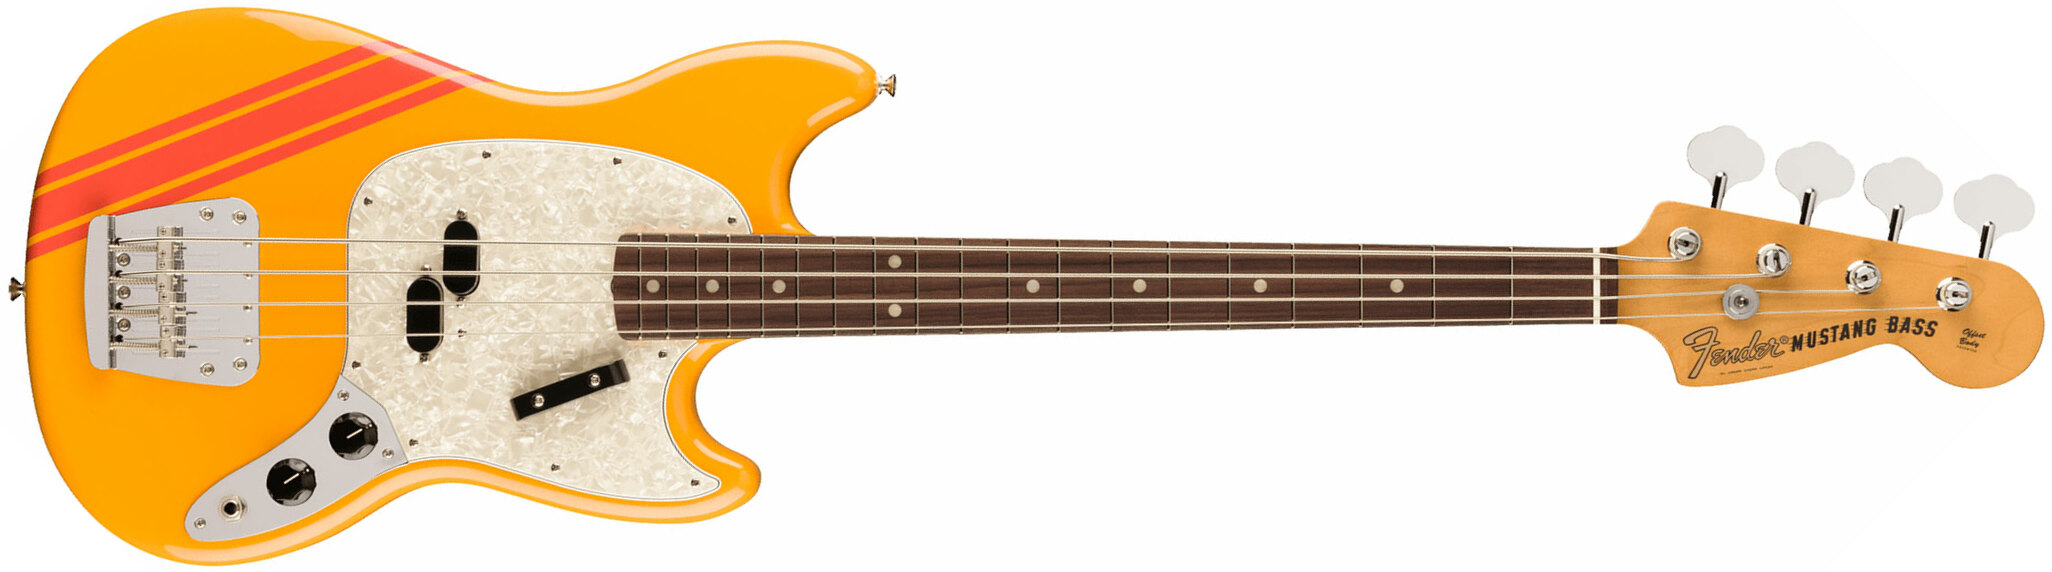 Fender Mustang Bass 70s Competition Vintera 2 Rw - Competition Orange - Solidbody E-bass - Main picture